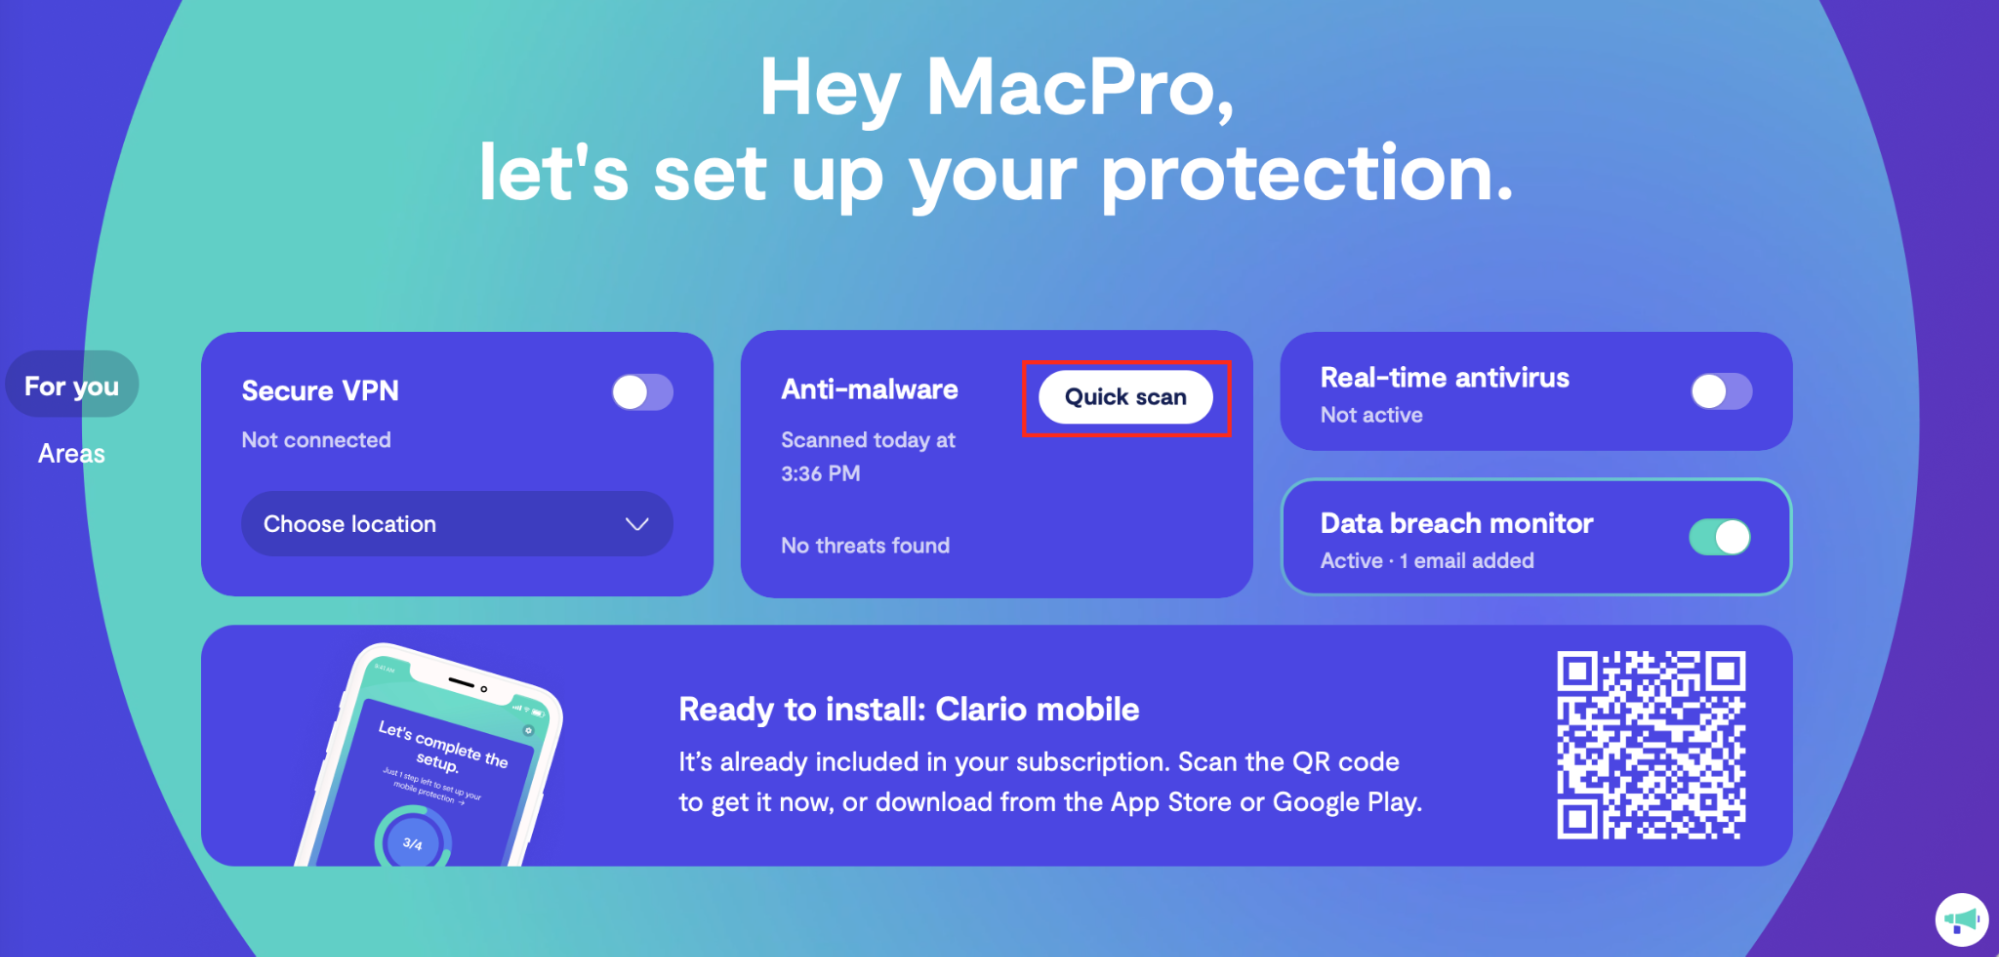 how do you scan your mac for viruses